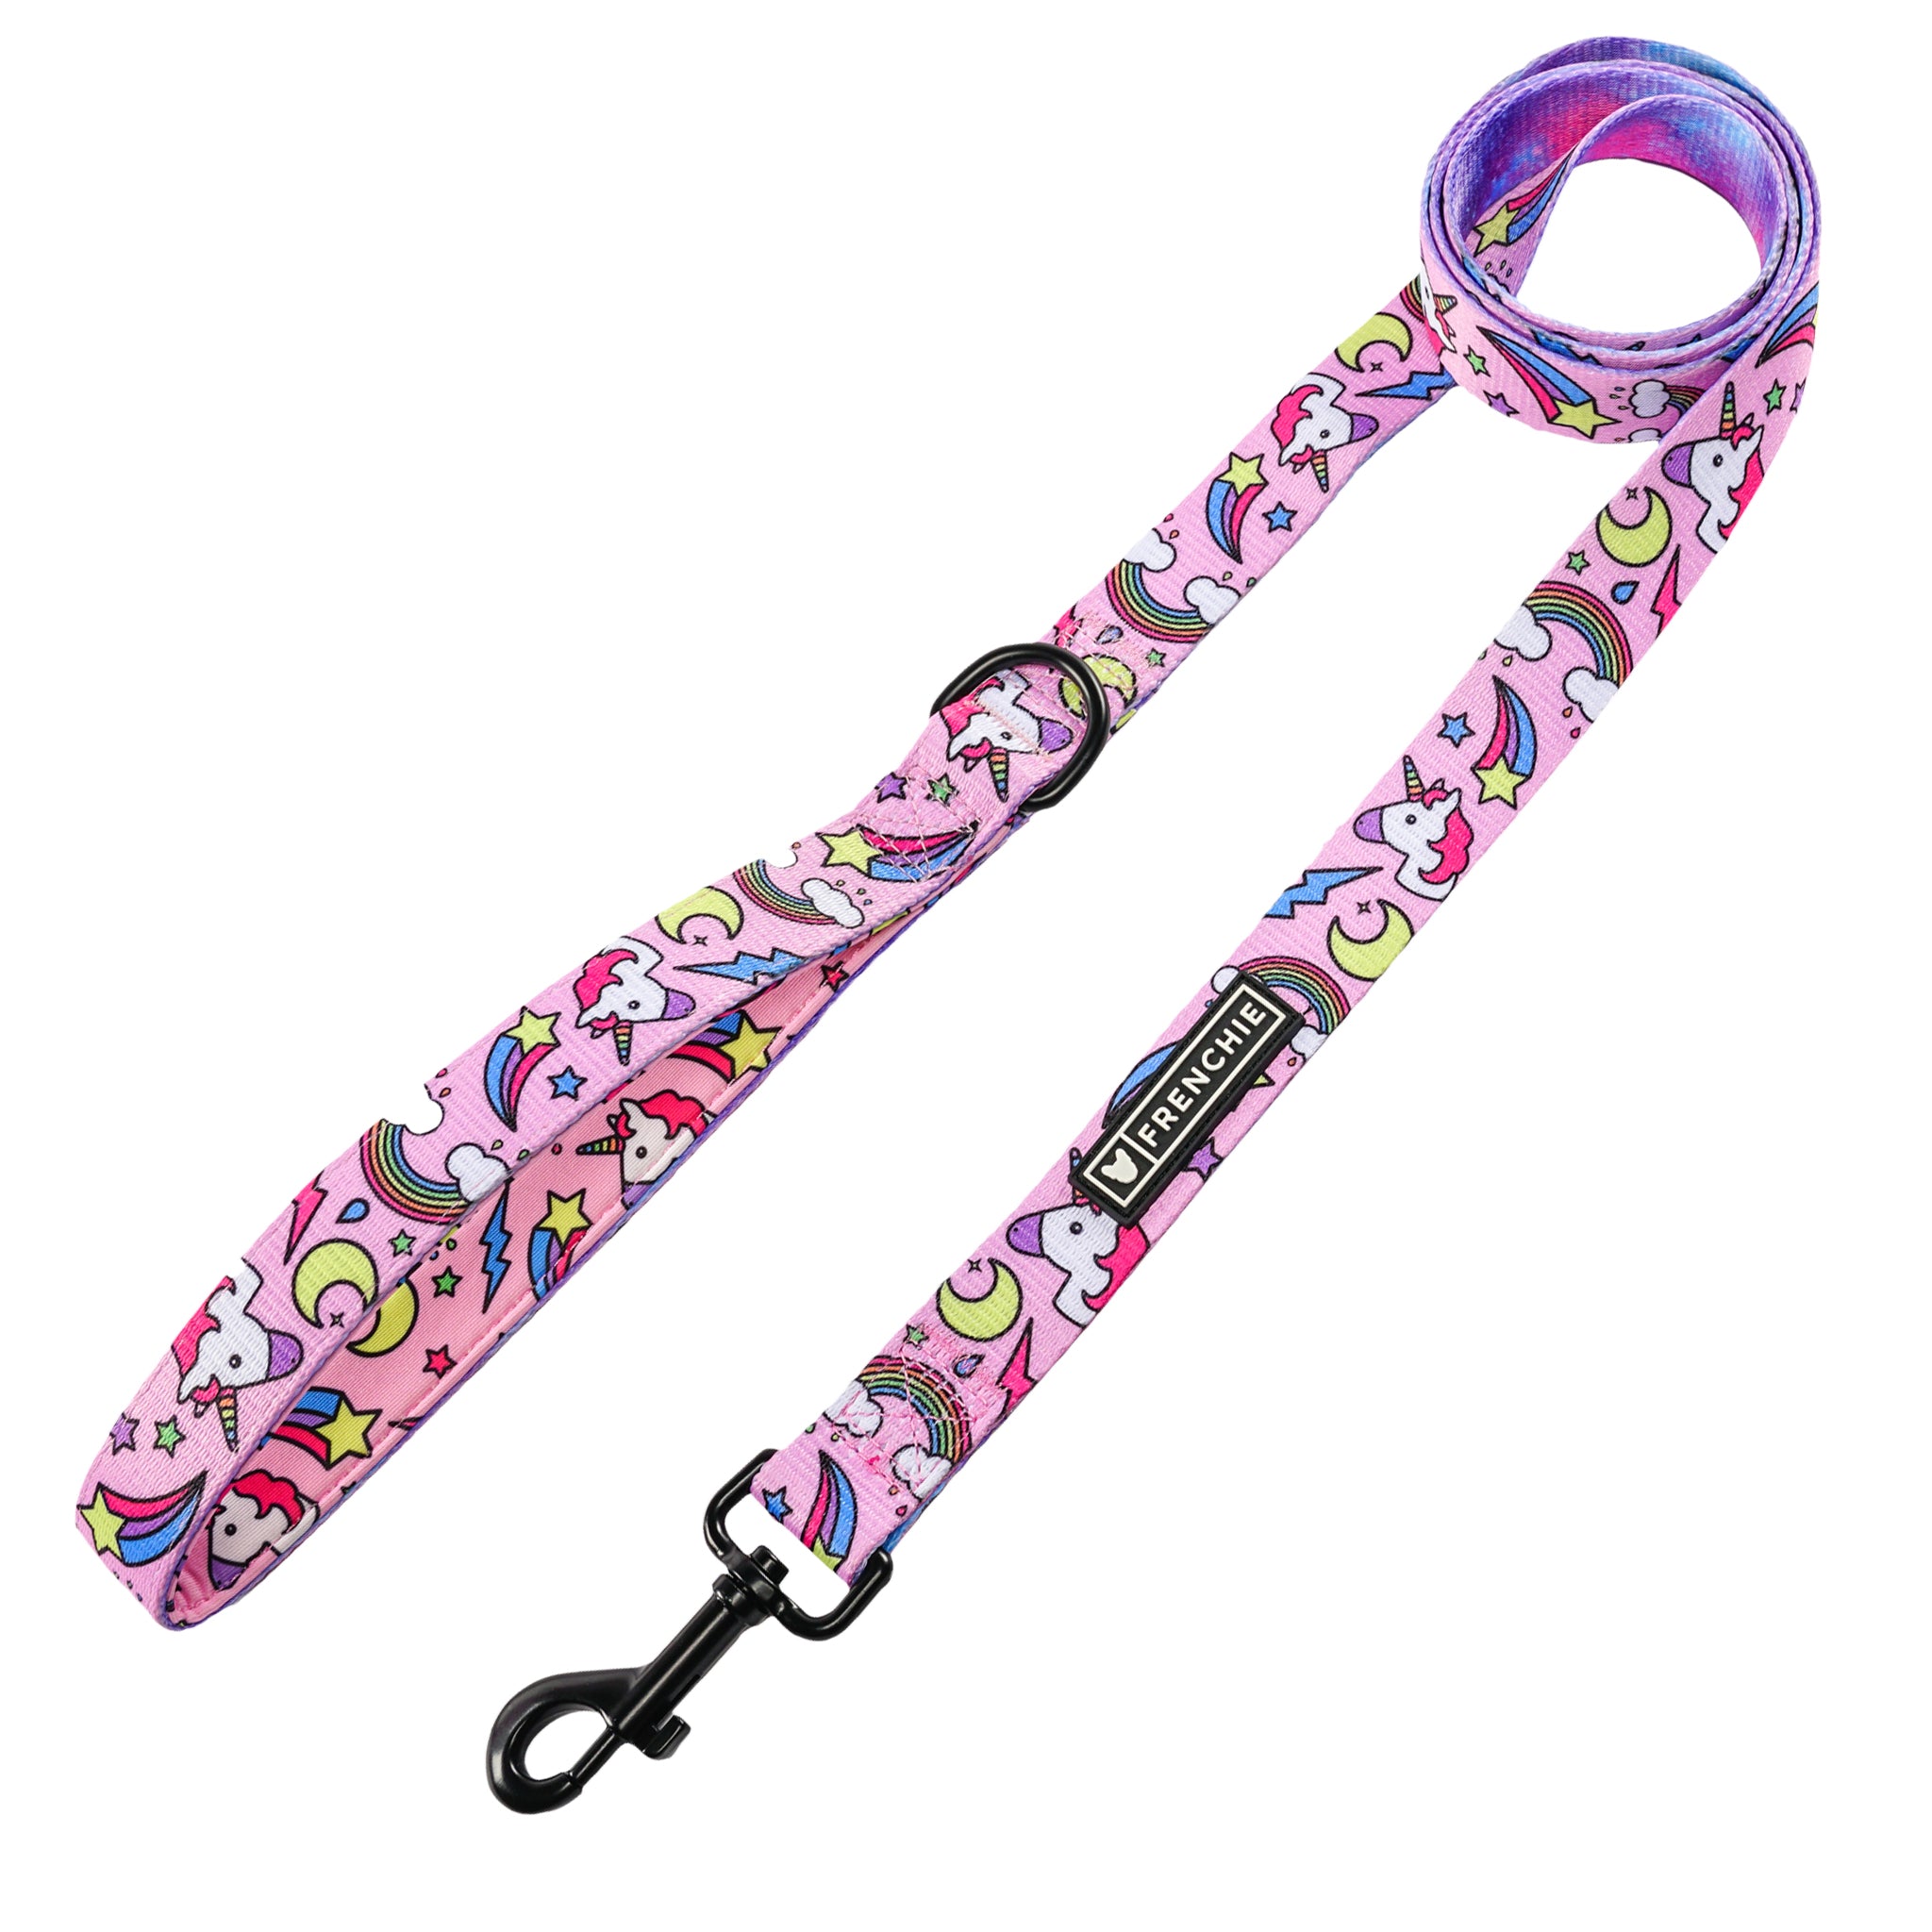 Frenchie Comfort Leash - Magical Unicorn MASTER - Frenchie Bulldog - Shop Harnesses for French Bulldogs - Shop French Bulldog Harness - Harnesses for Pugs